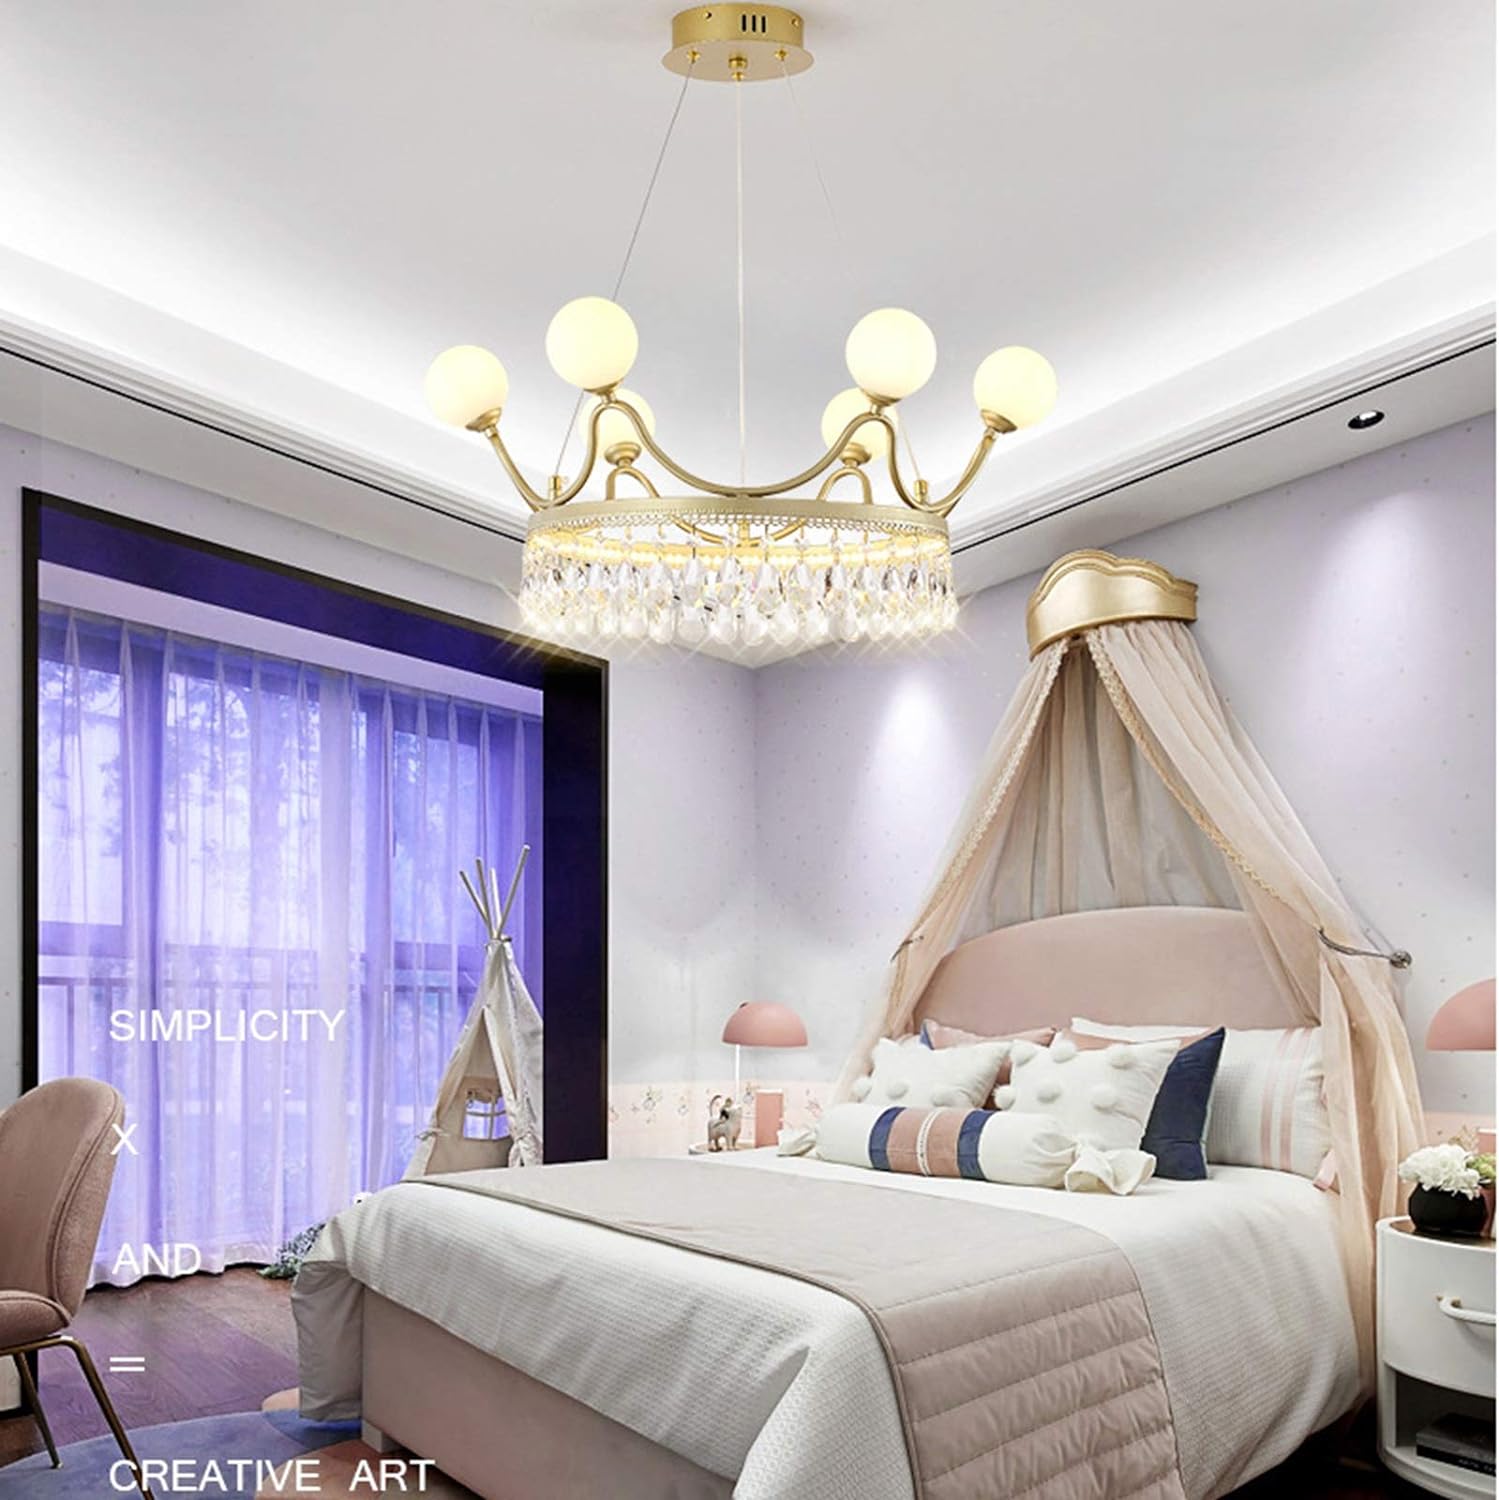 Buy Luxury Modern LED 6 Crown Crystal White Balls Ceiling Pendant Chandelier 60cm - CL-14 | Shop at Supply Master Accra, Ghana Lamps & Lightings Buy Tools hardware Building materials